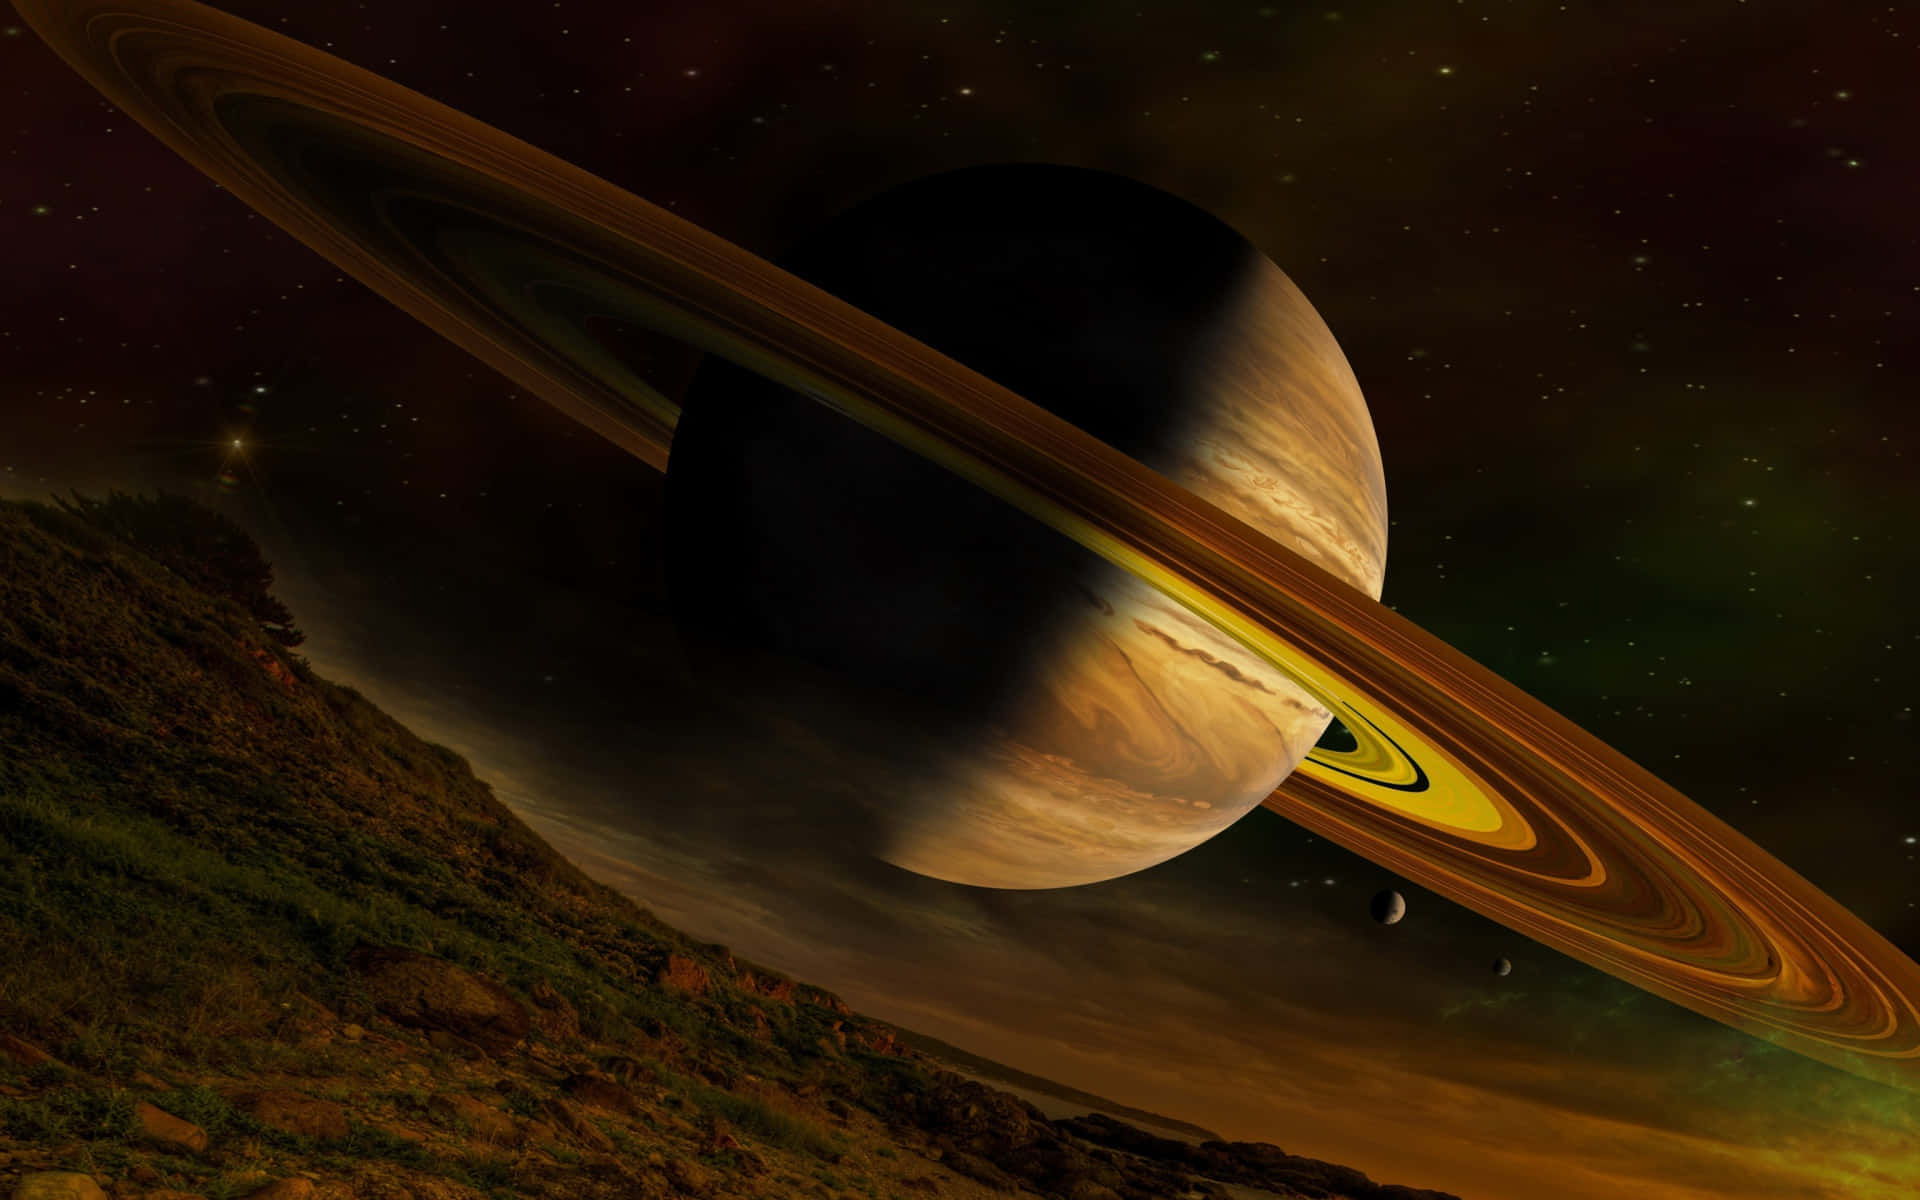 Captivating View of Saturn